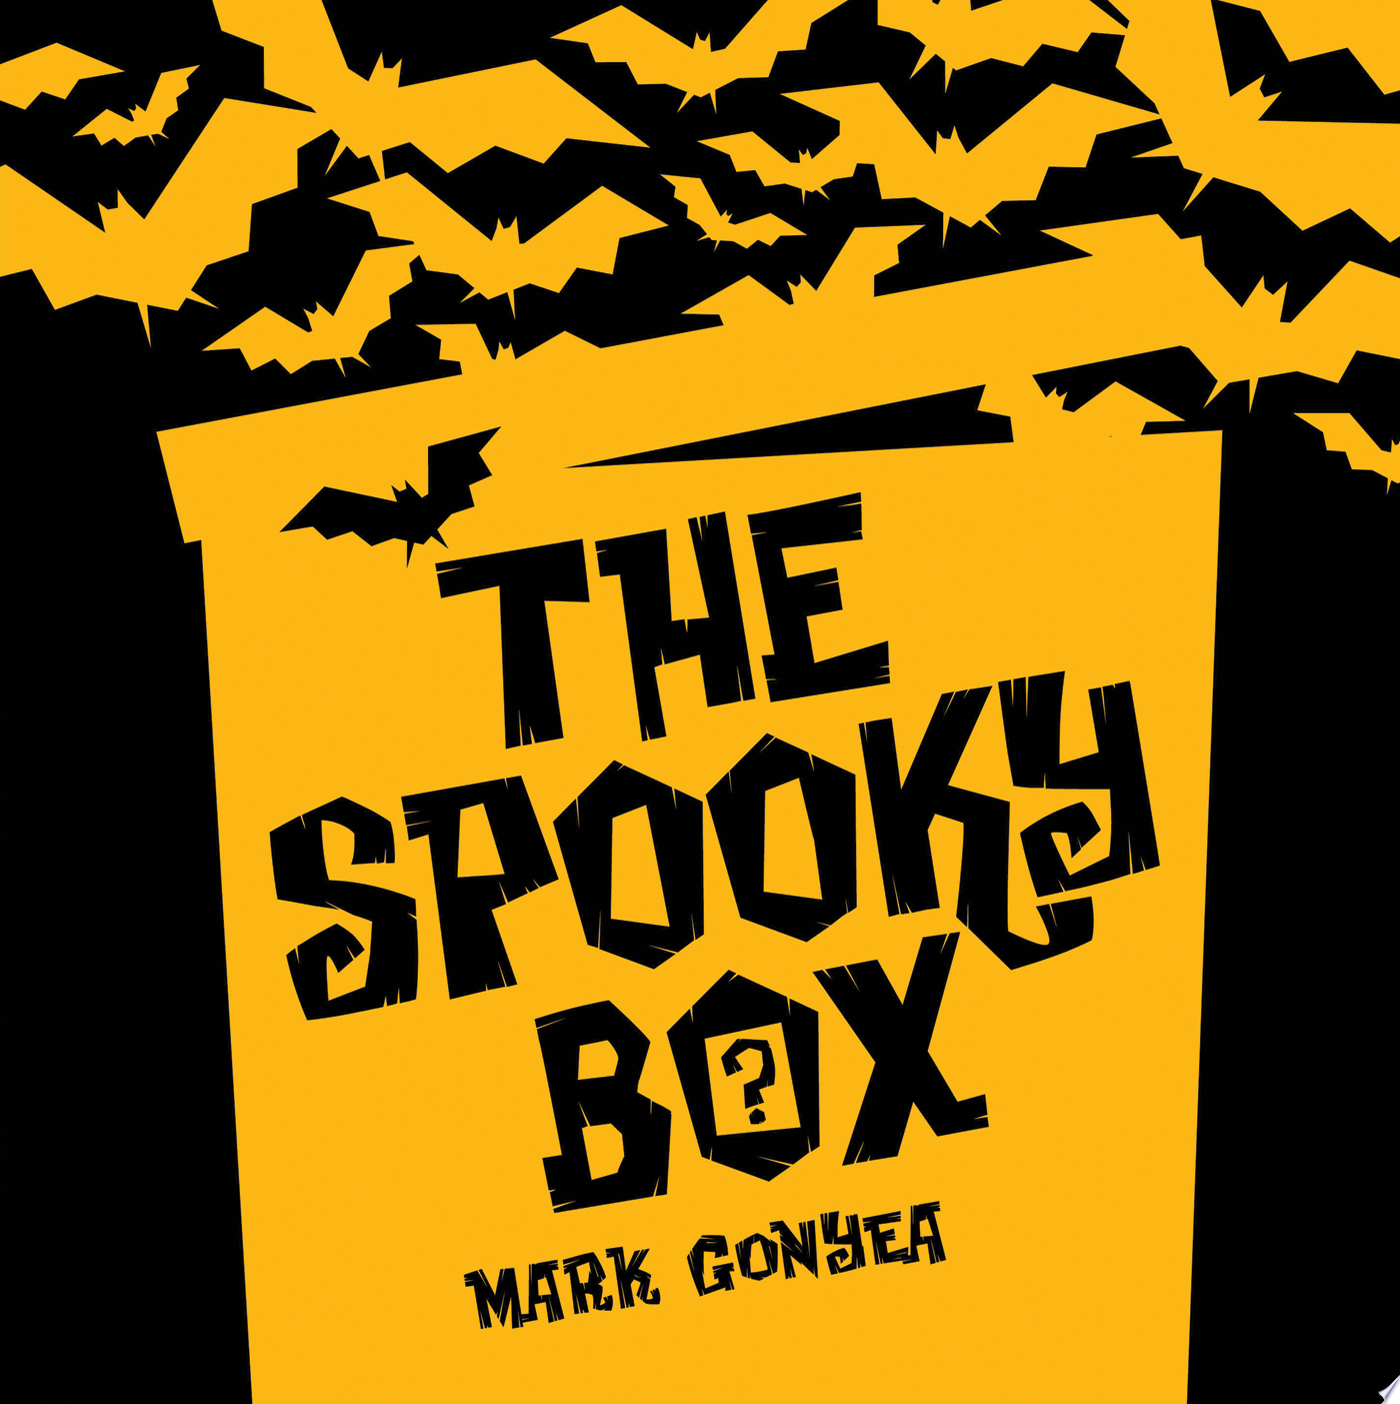 Image for "The Spooky Box"